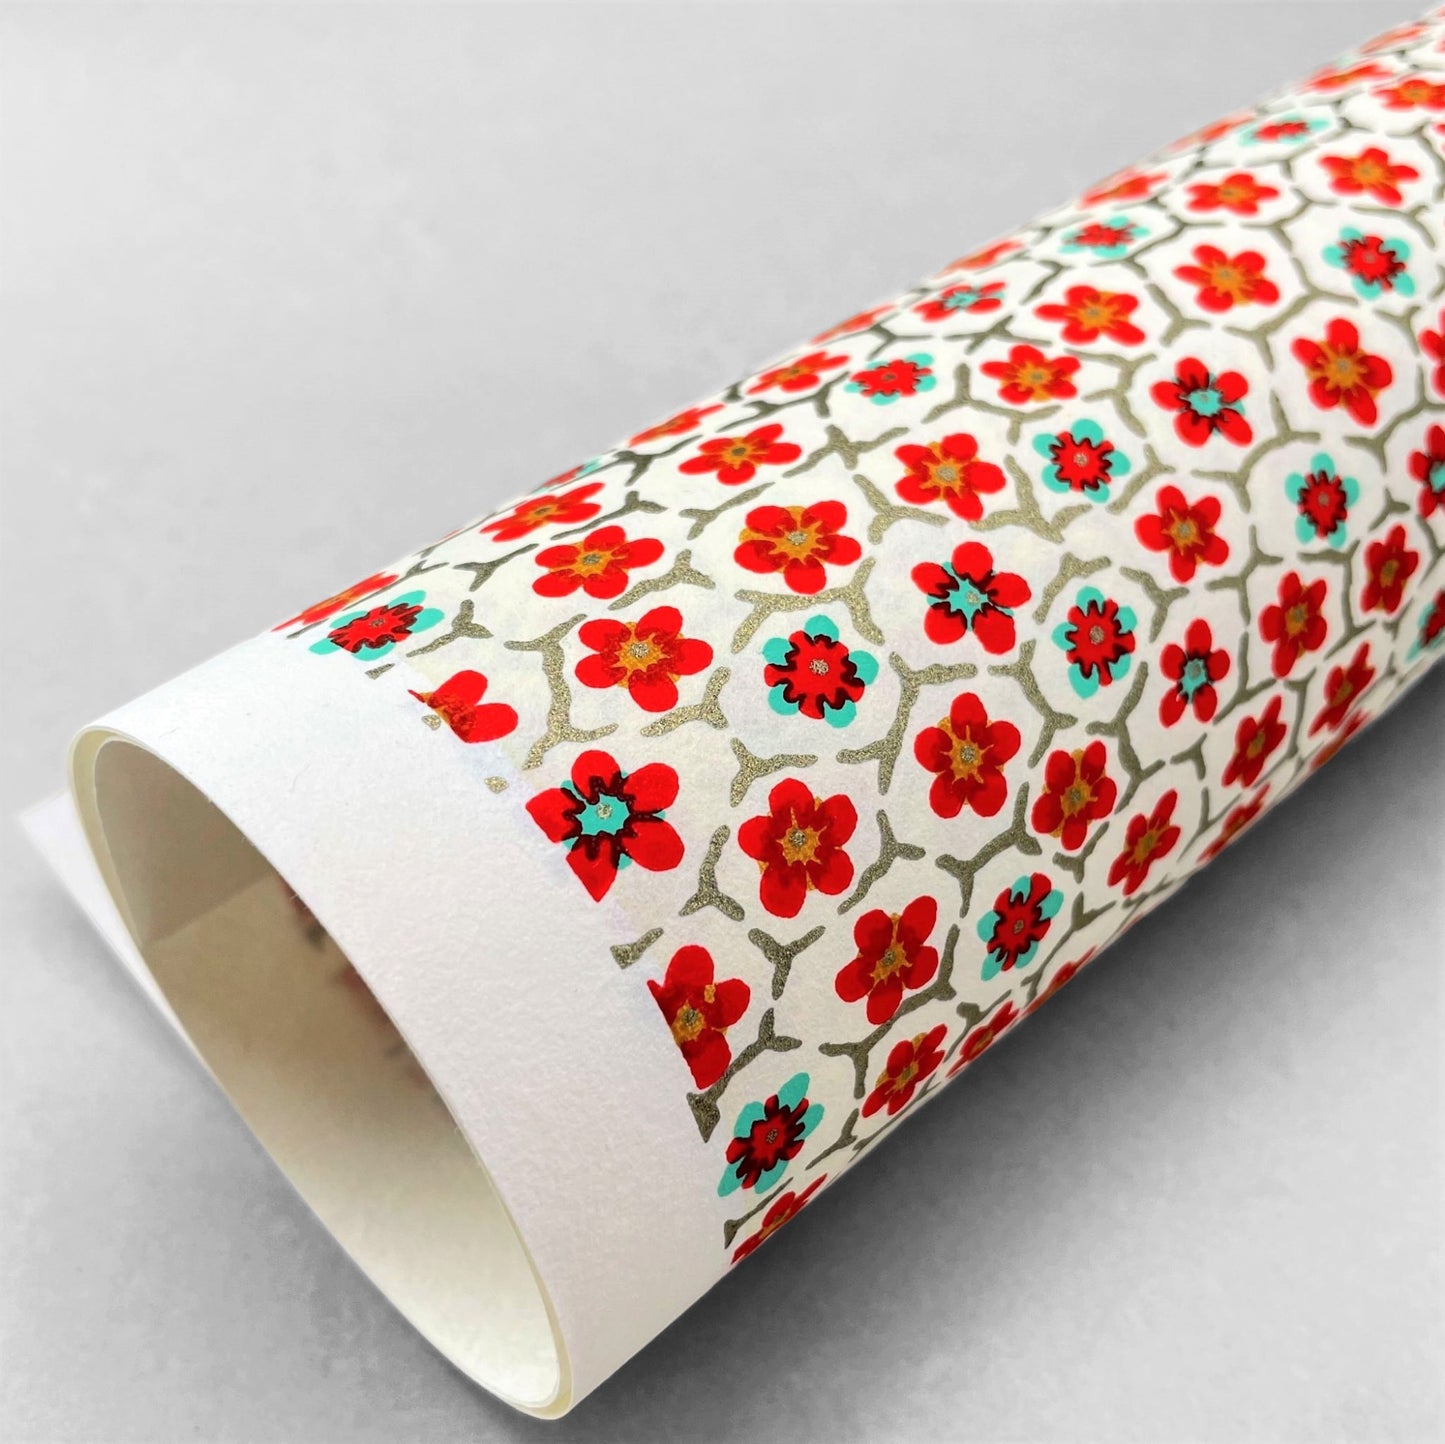 japanese silk-screen handmade paper, chiyogami, with red and aqua plum flowers repeat pattern